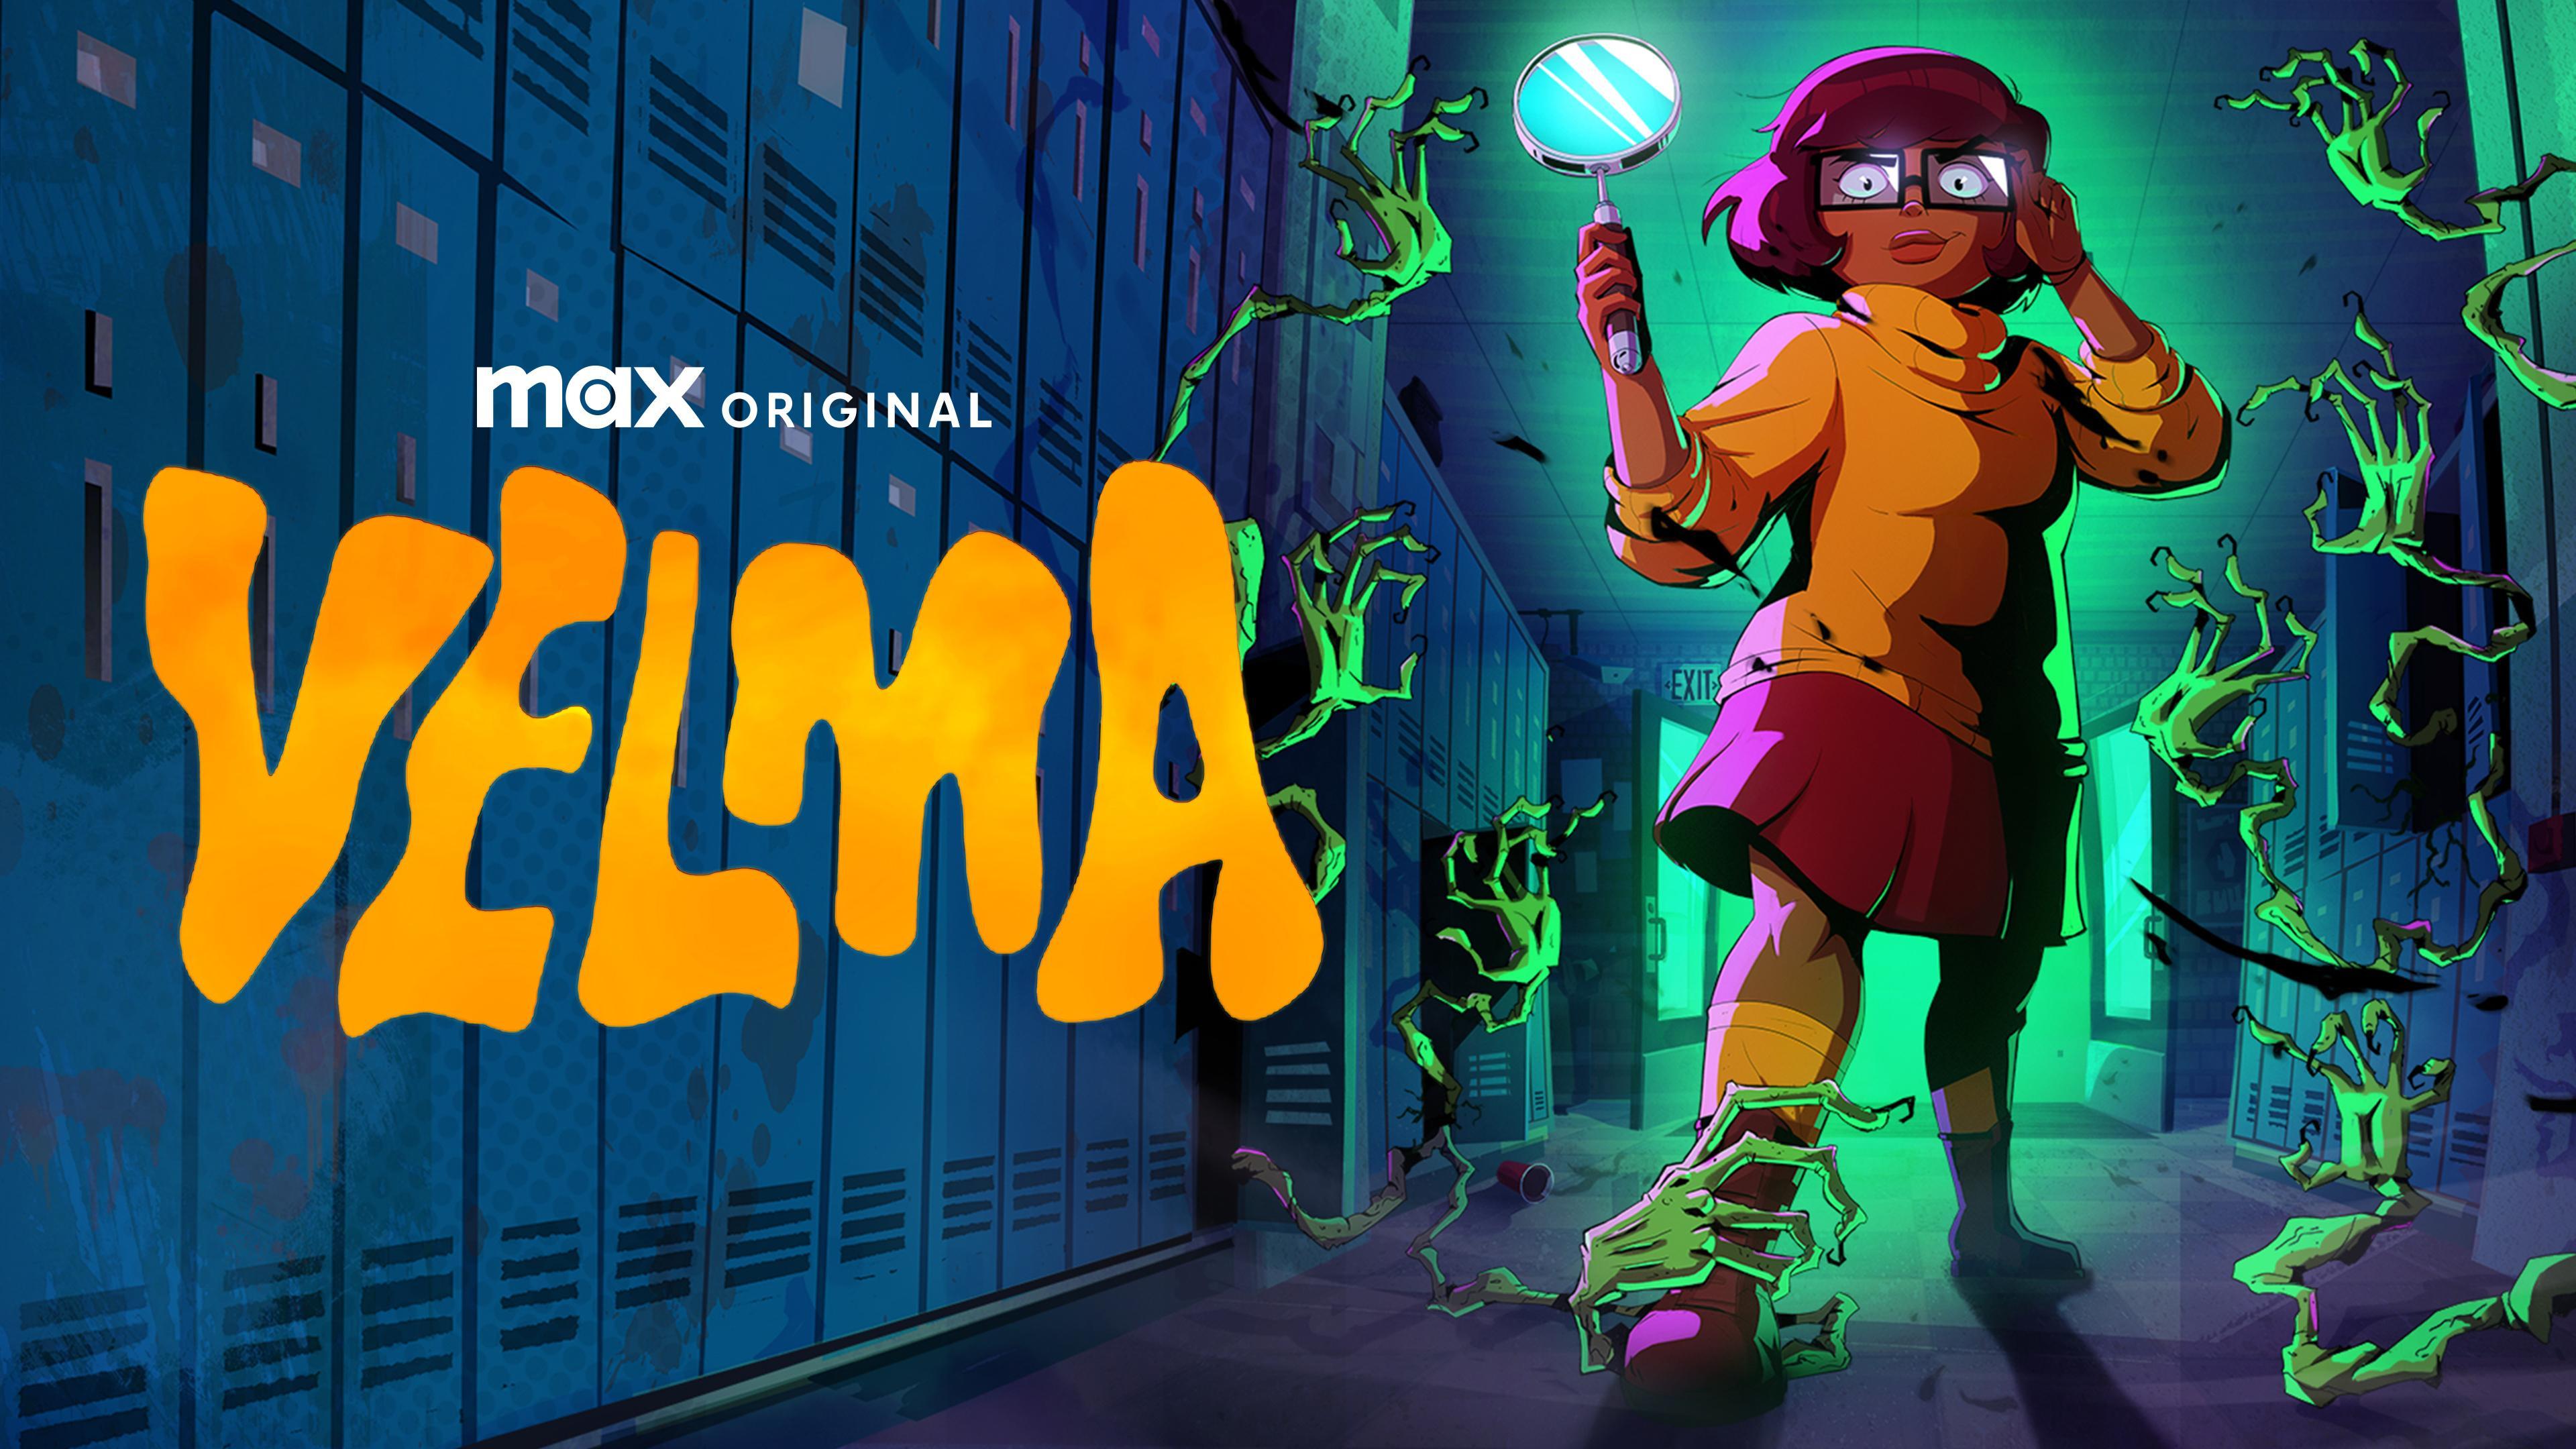 Velma trailer puts an adult animated spin on the Mystery Inc. gang